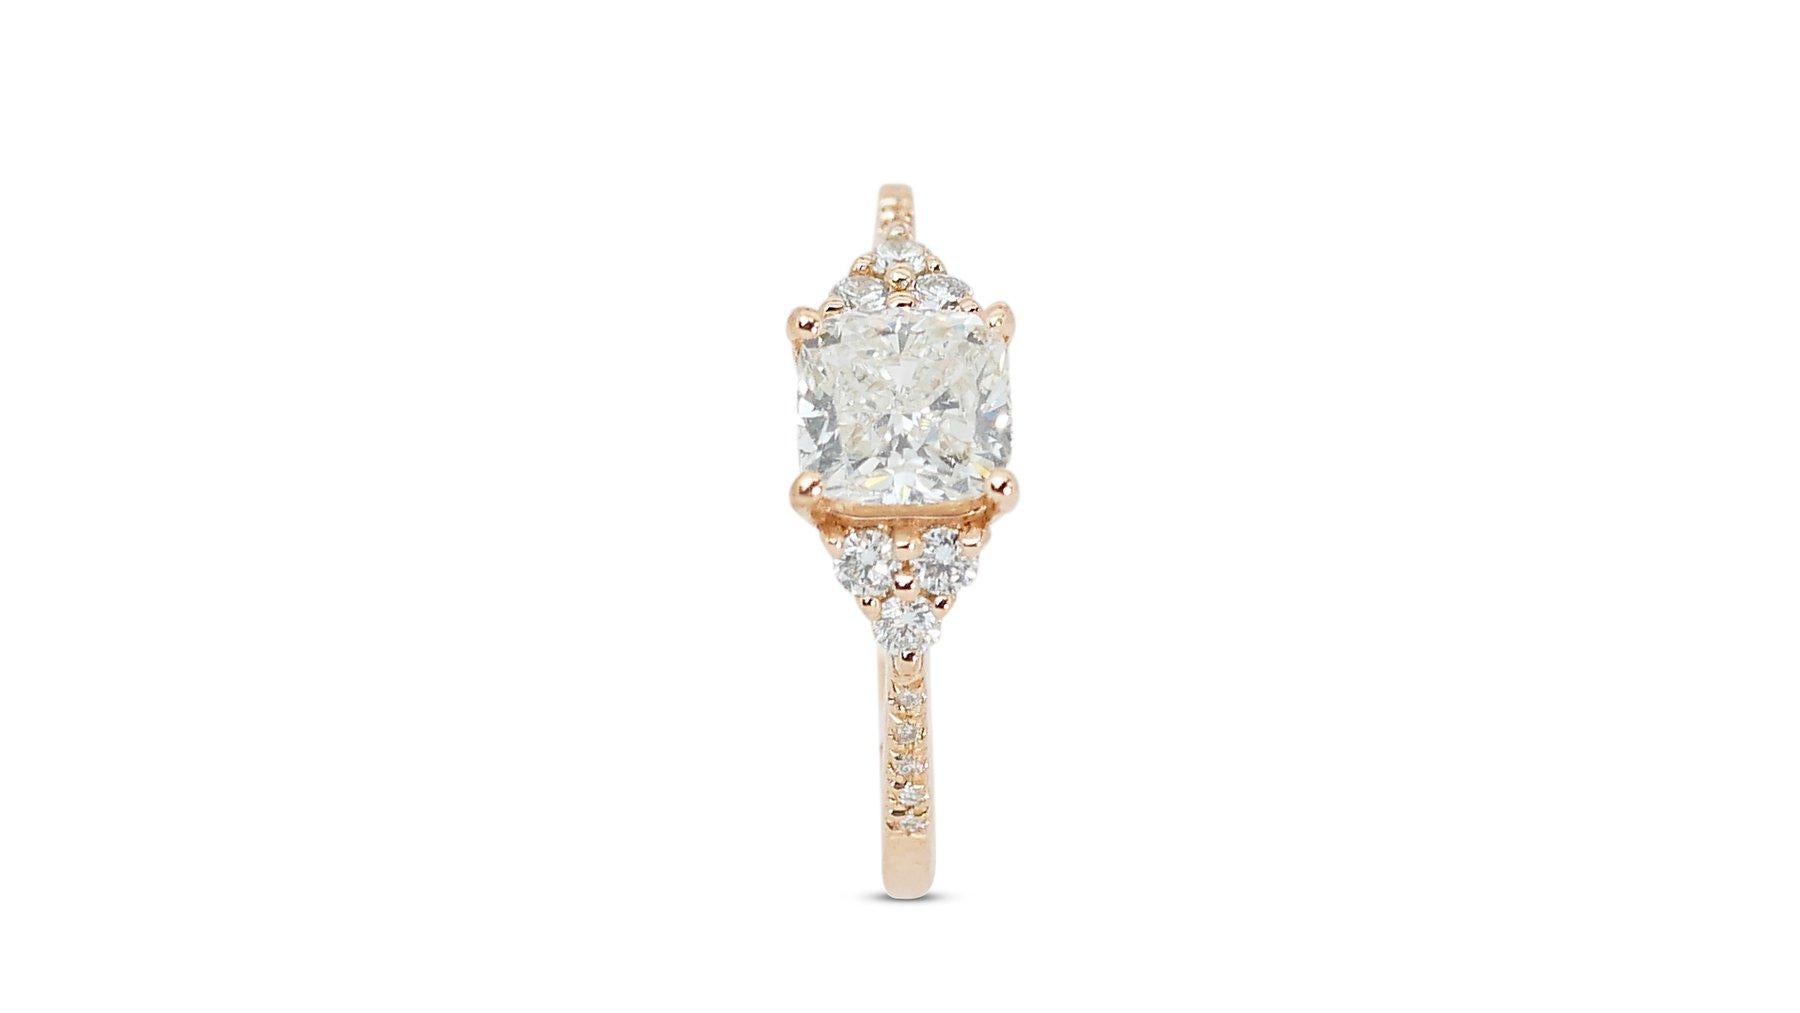 Luminous 1.98ct Diamonds Pave Ring in 18k Yellow Gold - GIA Certified For Sale 1